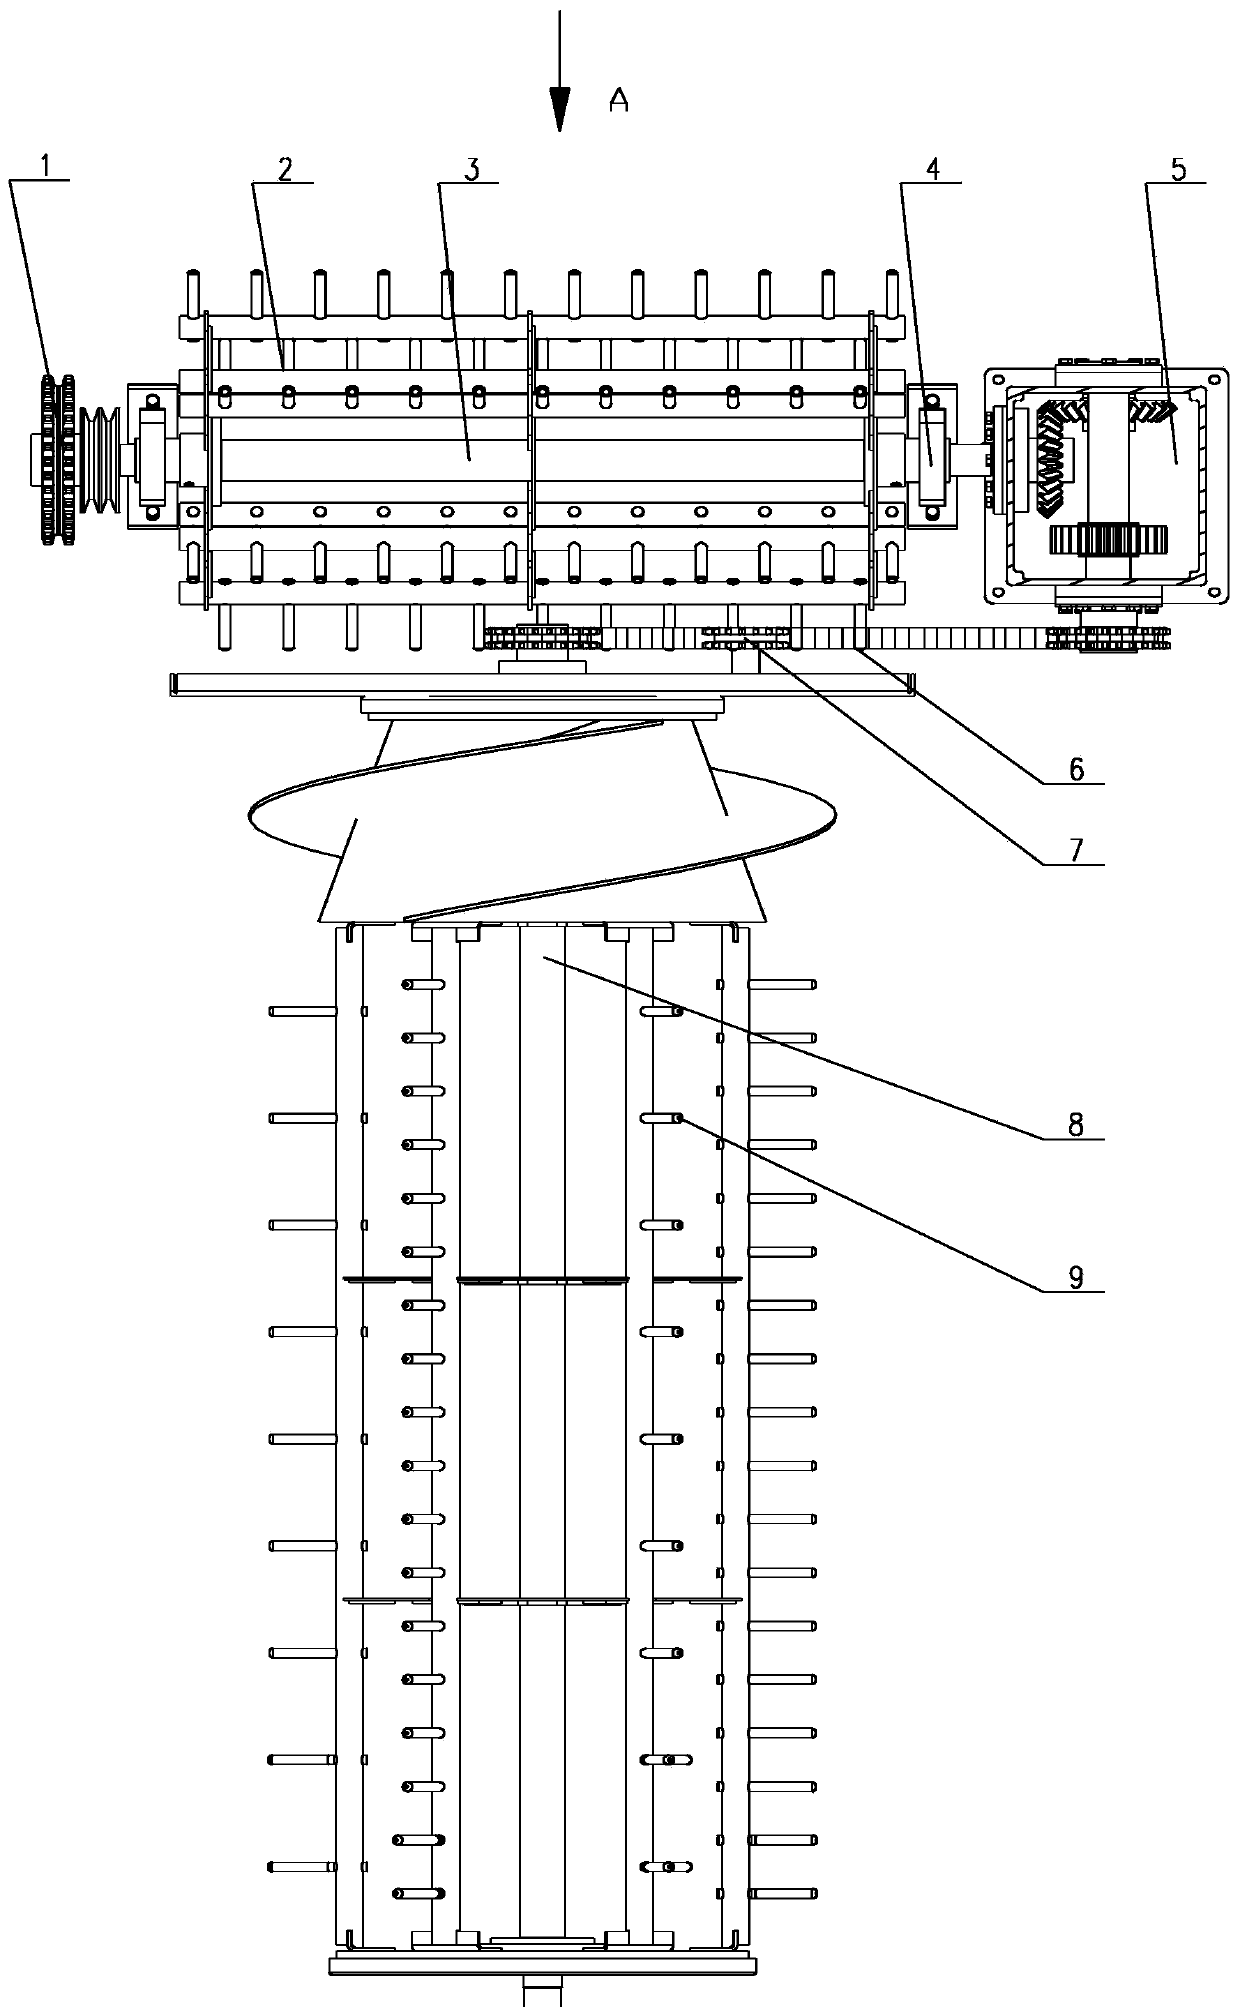 A power transmission system of a cutting and longitudinal flow threshing and separating device